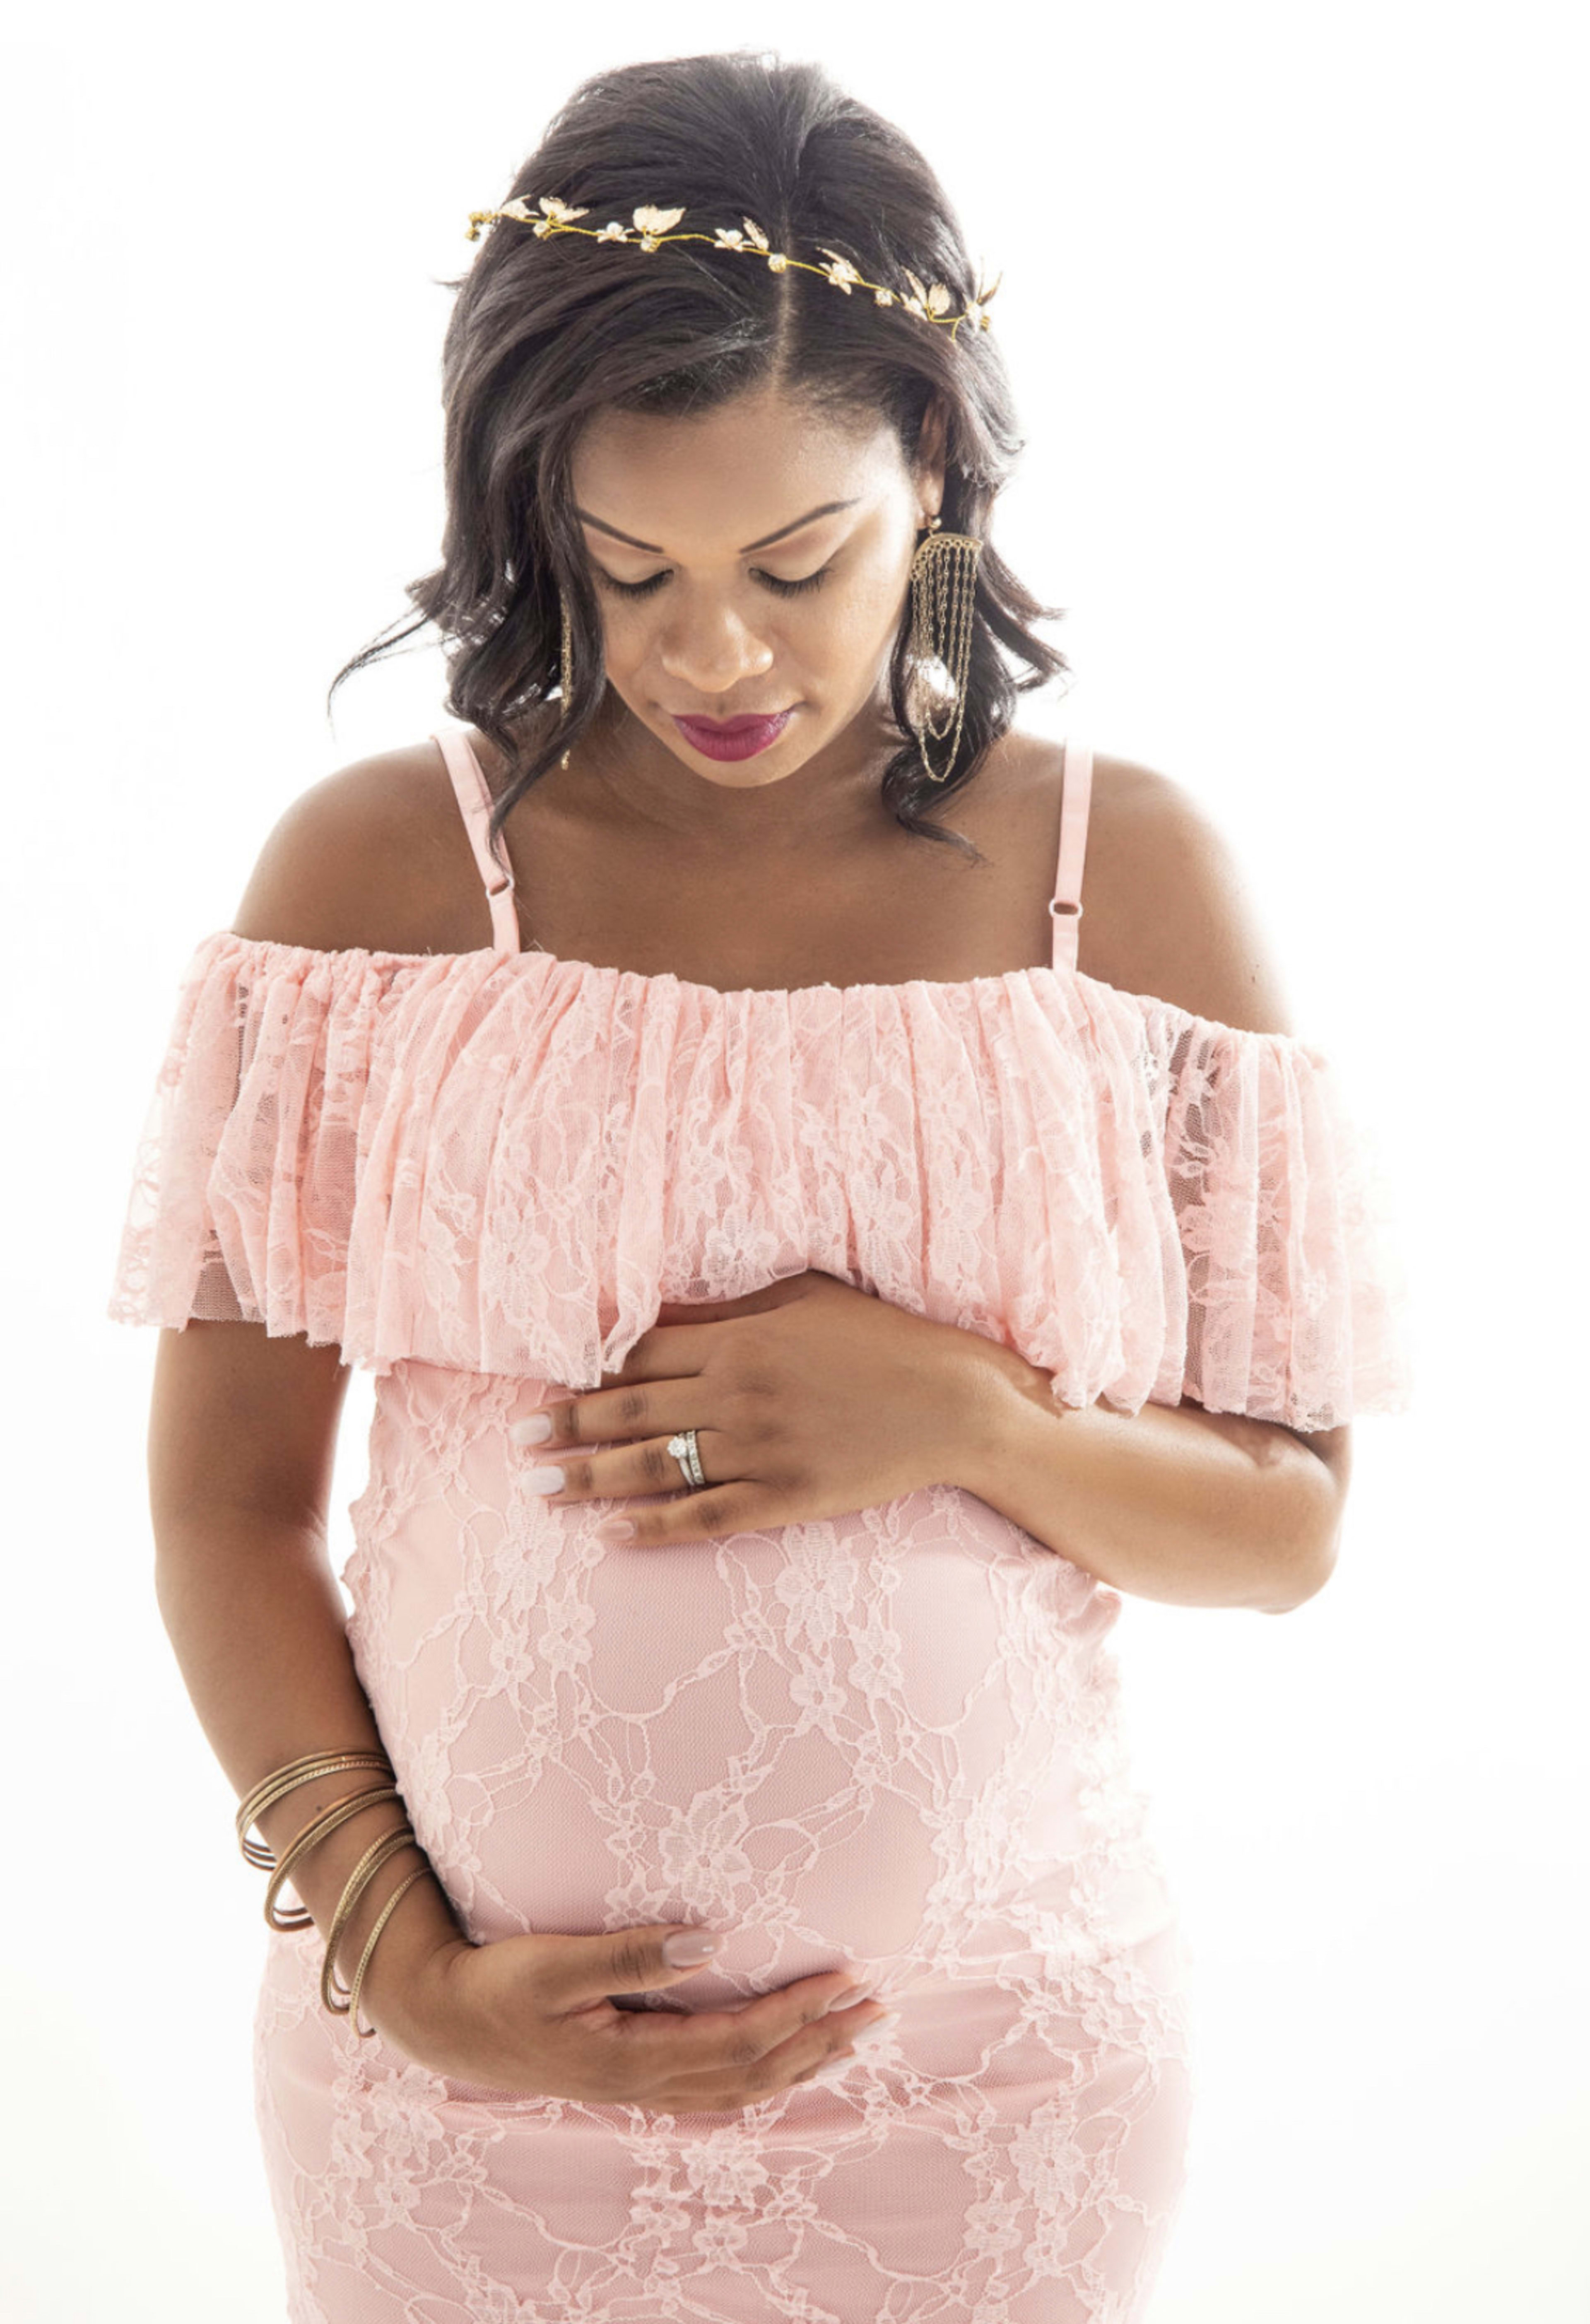 A pregnant woman in a boho pink dress cradling her belly during a maternity photo shoot.